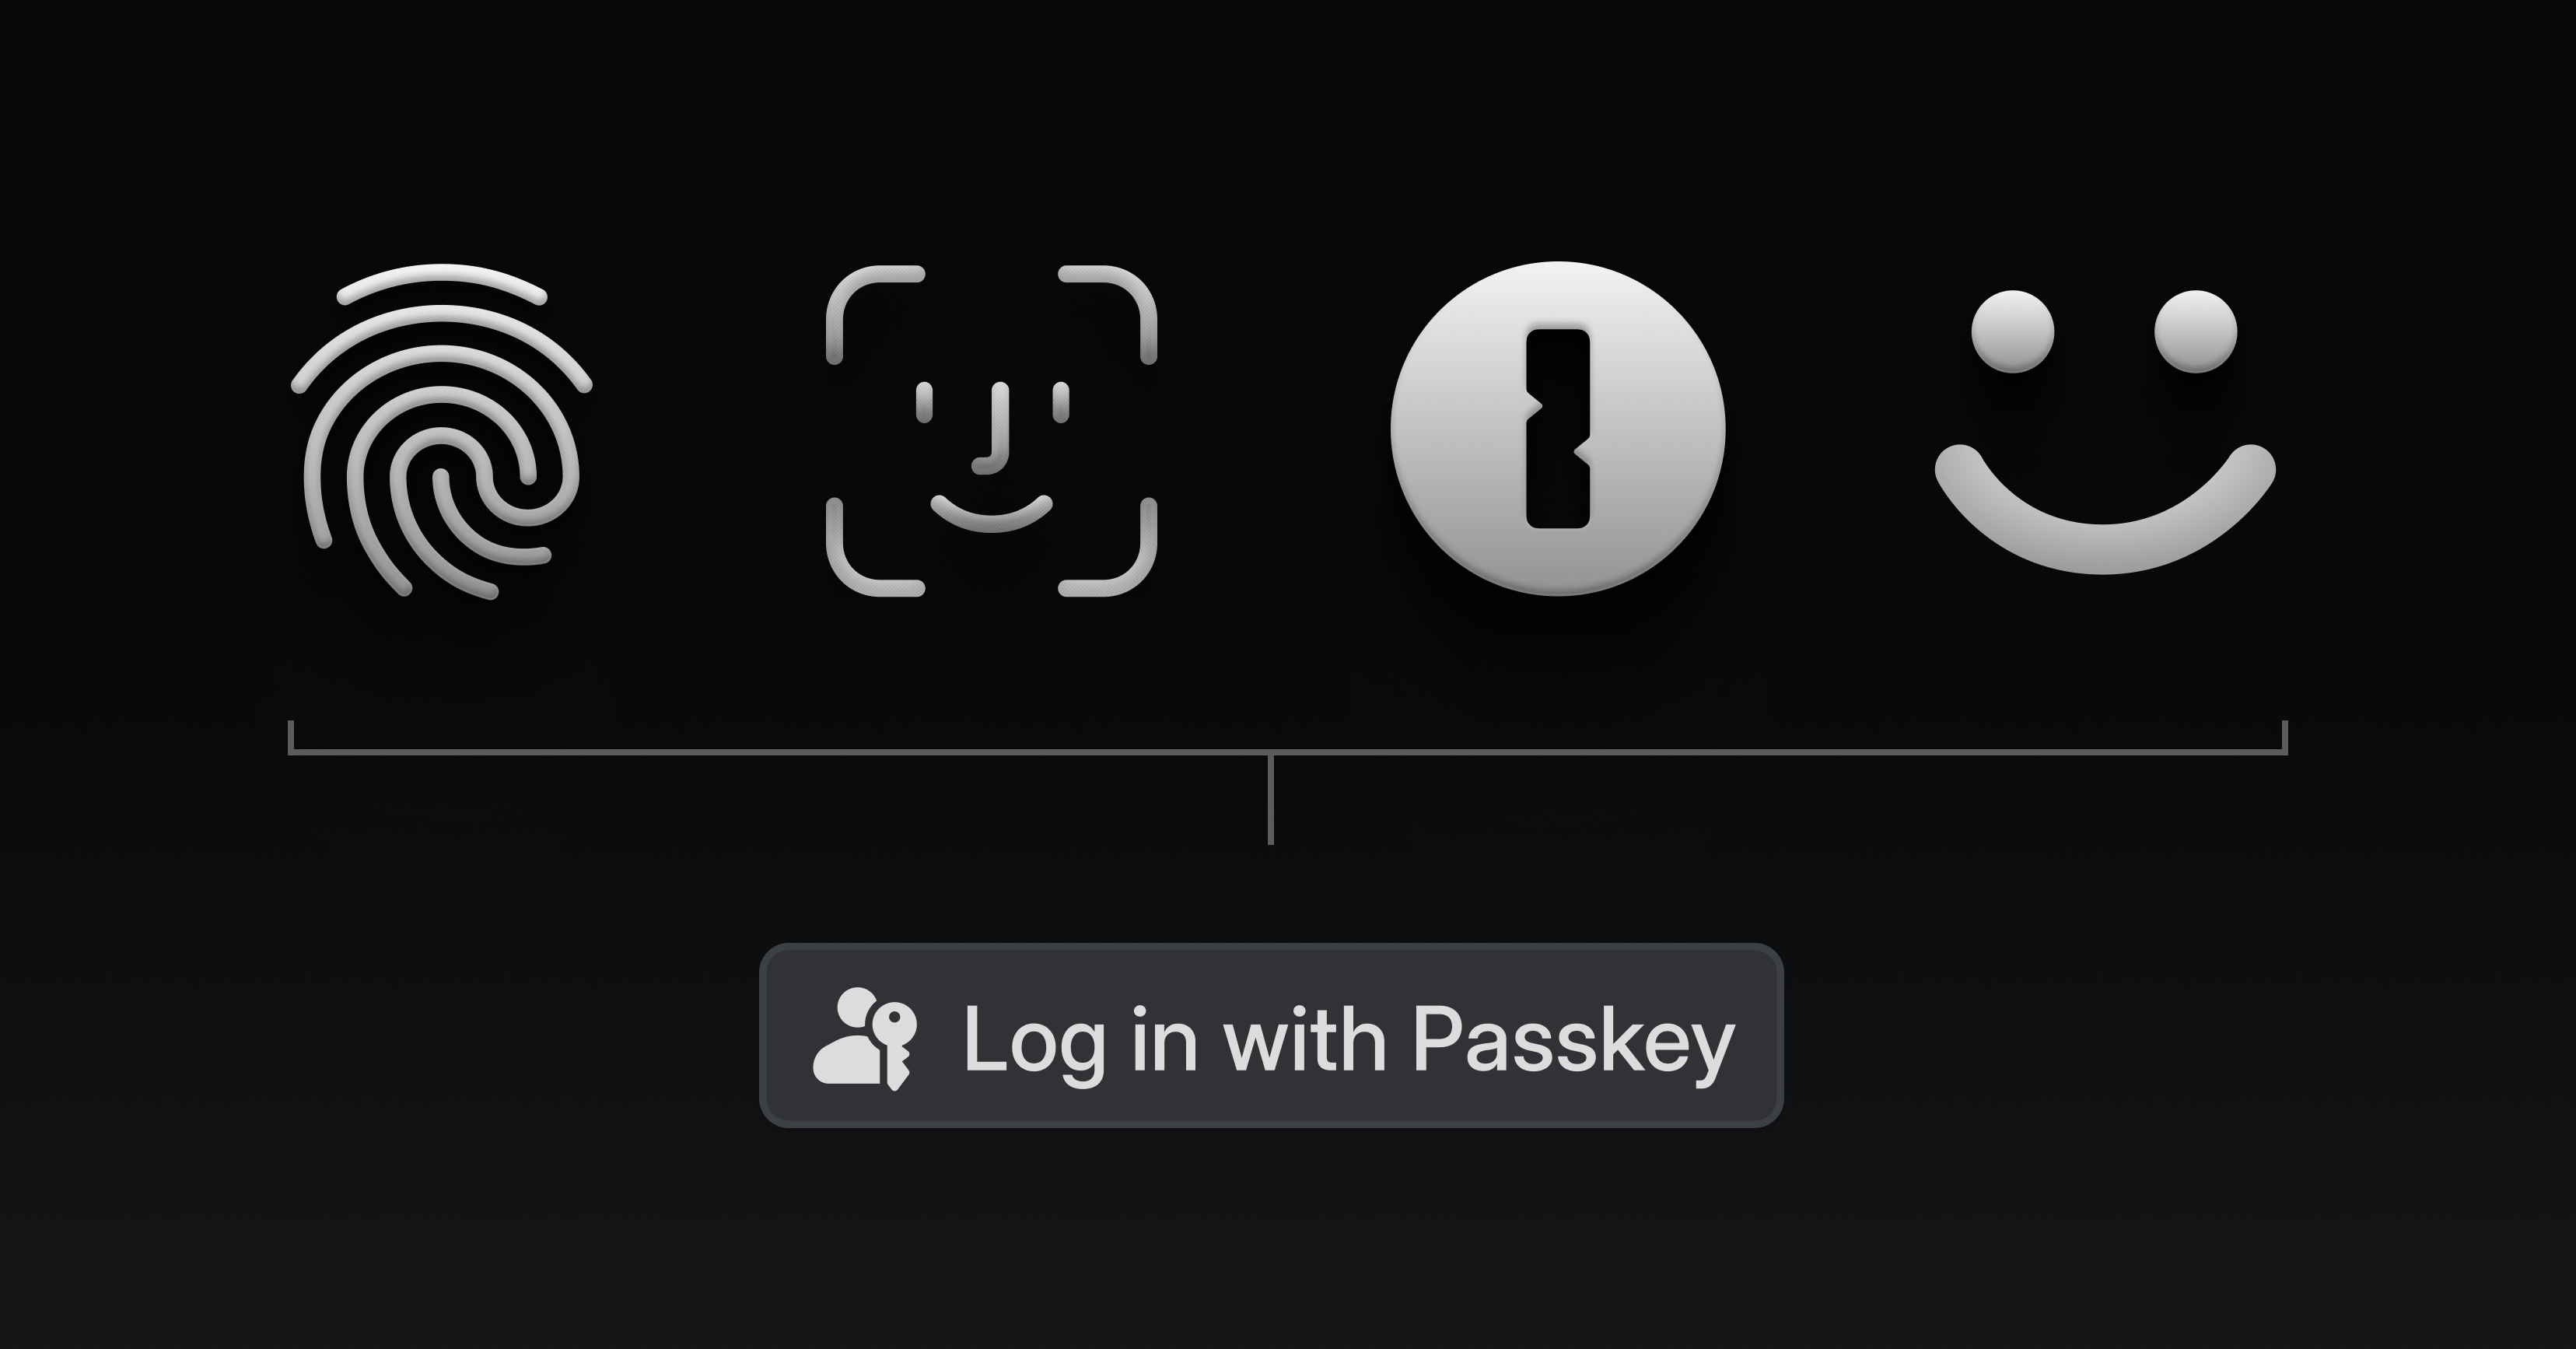 Log in with passkey button shown alongside a fingerprint (Touch ID), Face ID, 1Password, and Microsoft Hello